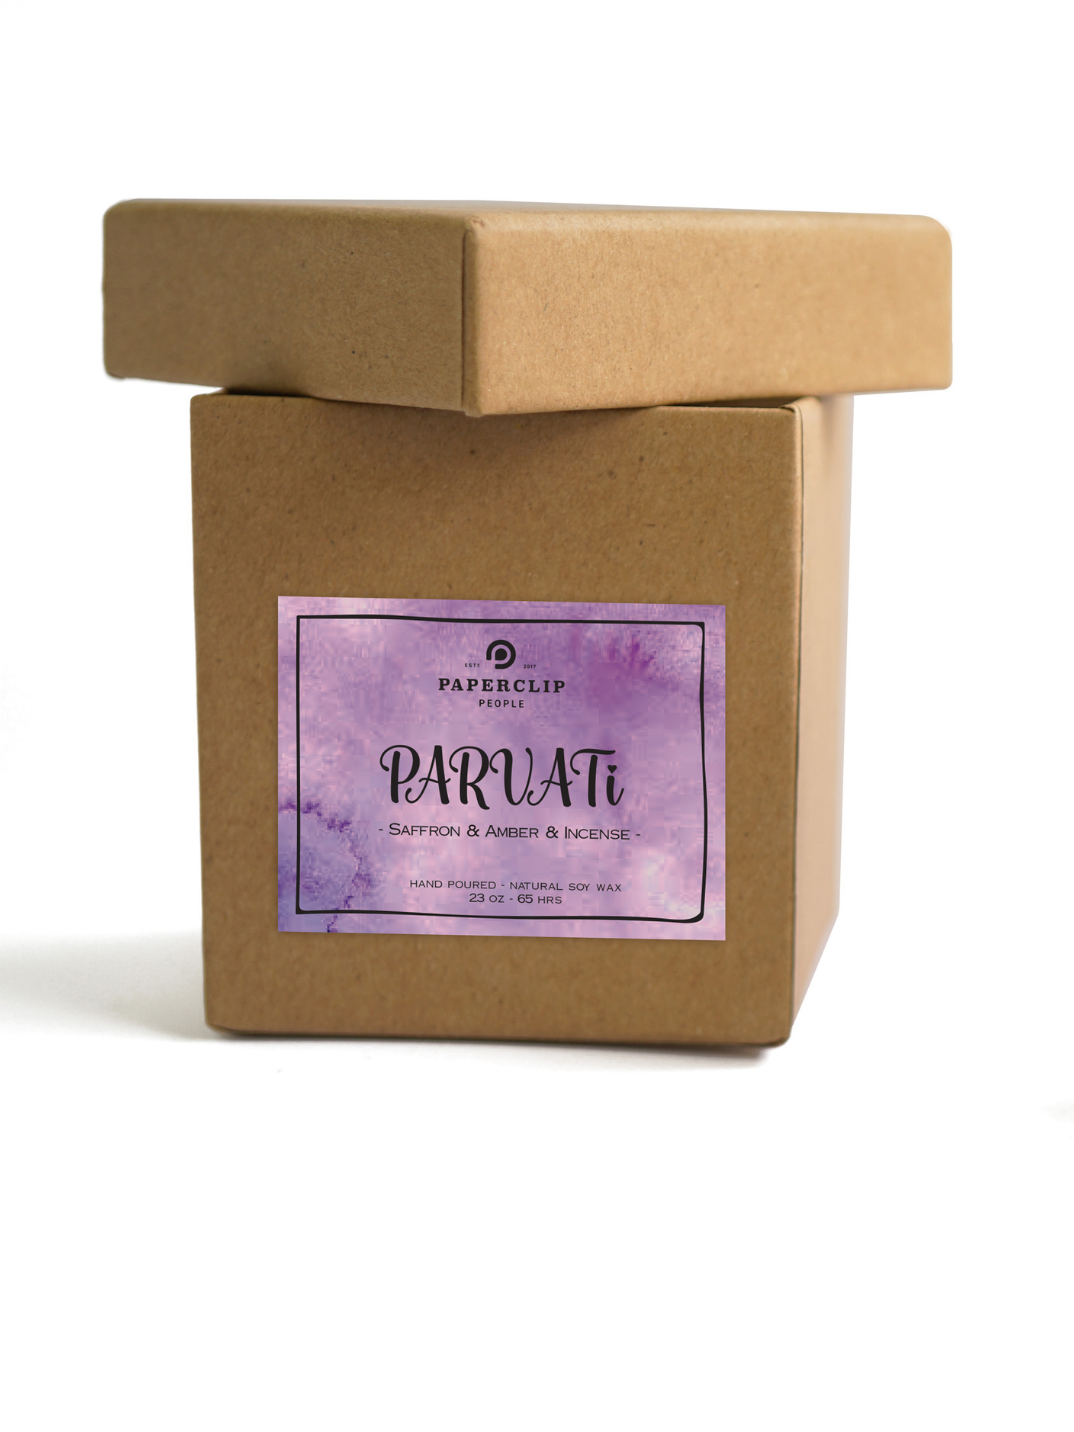 parvati hand poured candle saffron, amber & incense scented made in Bali shop now